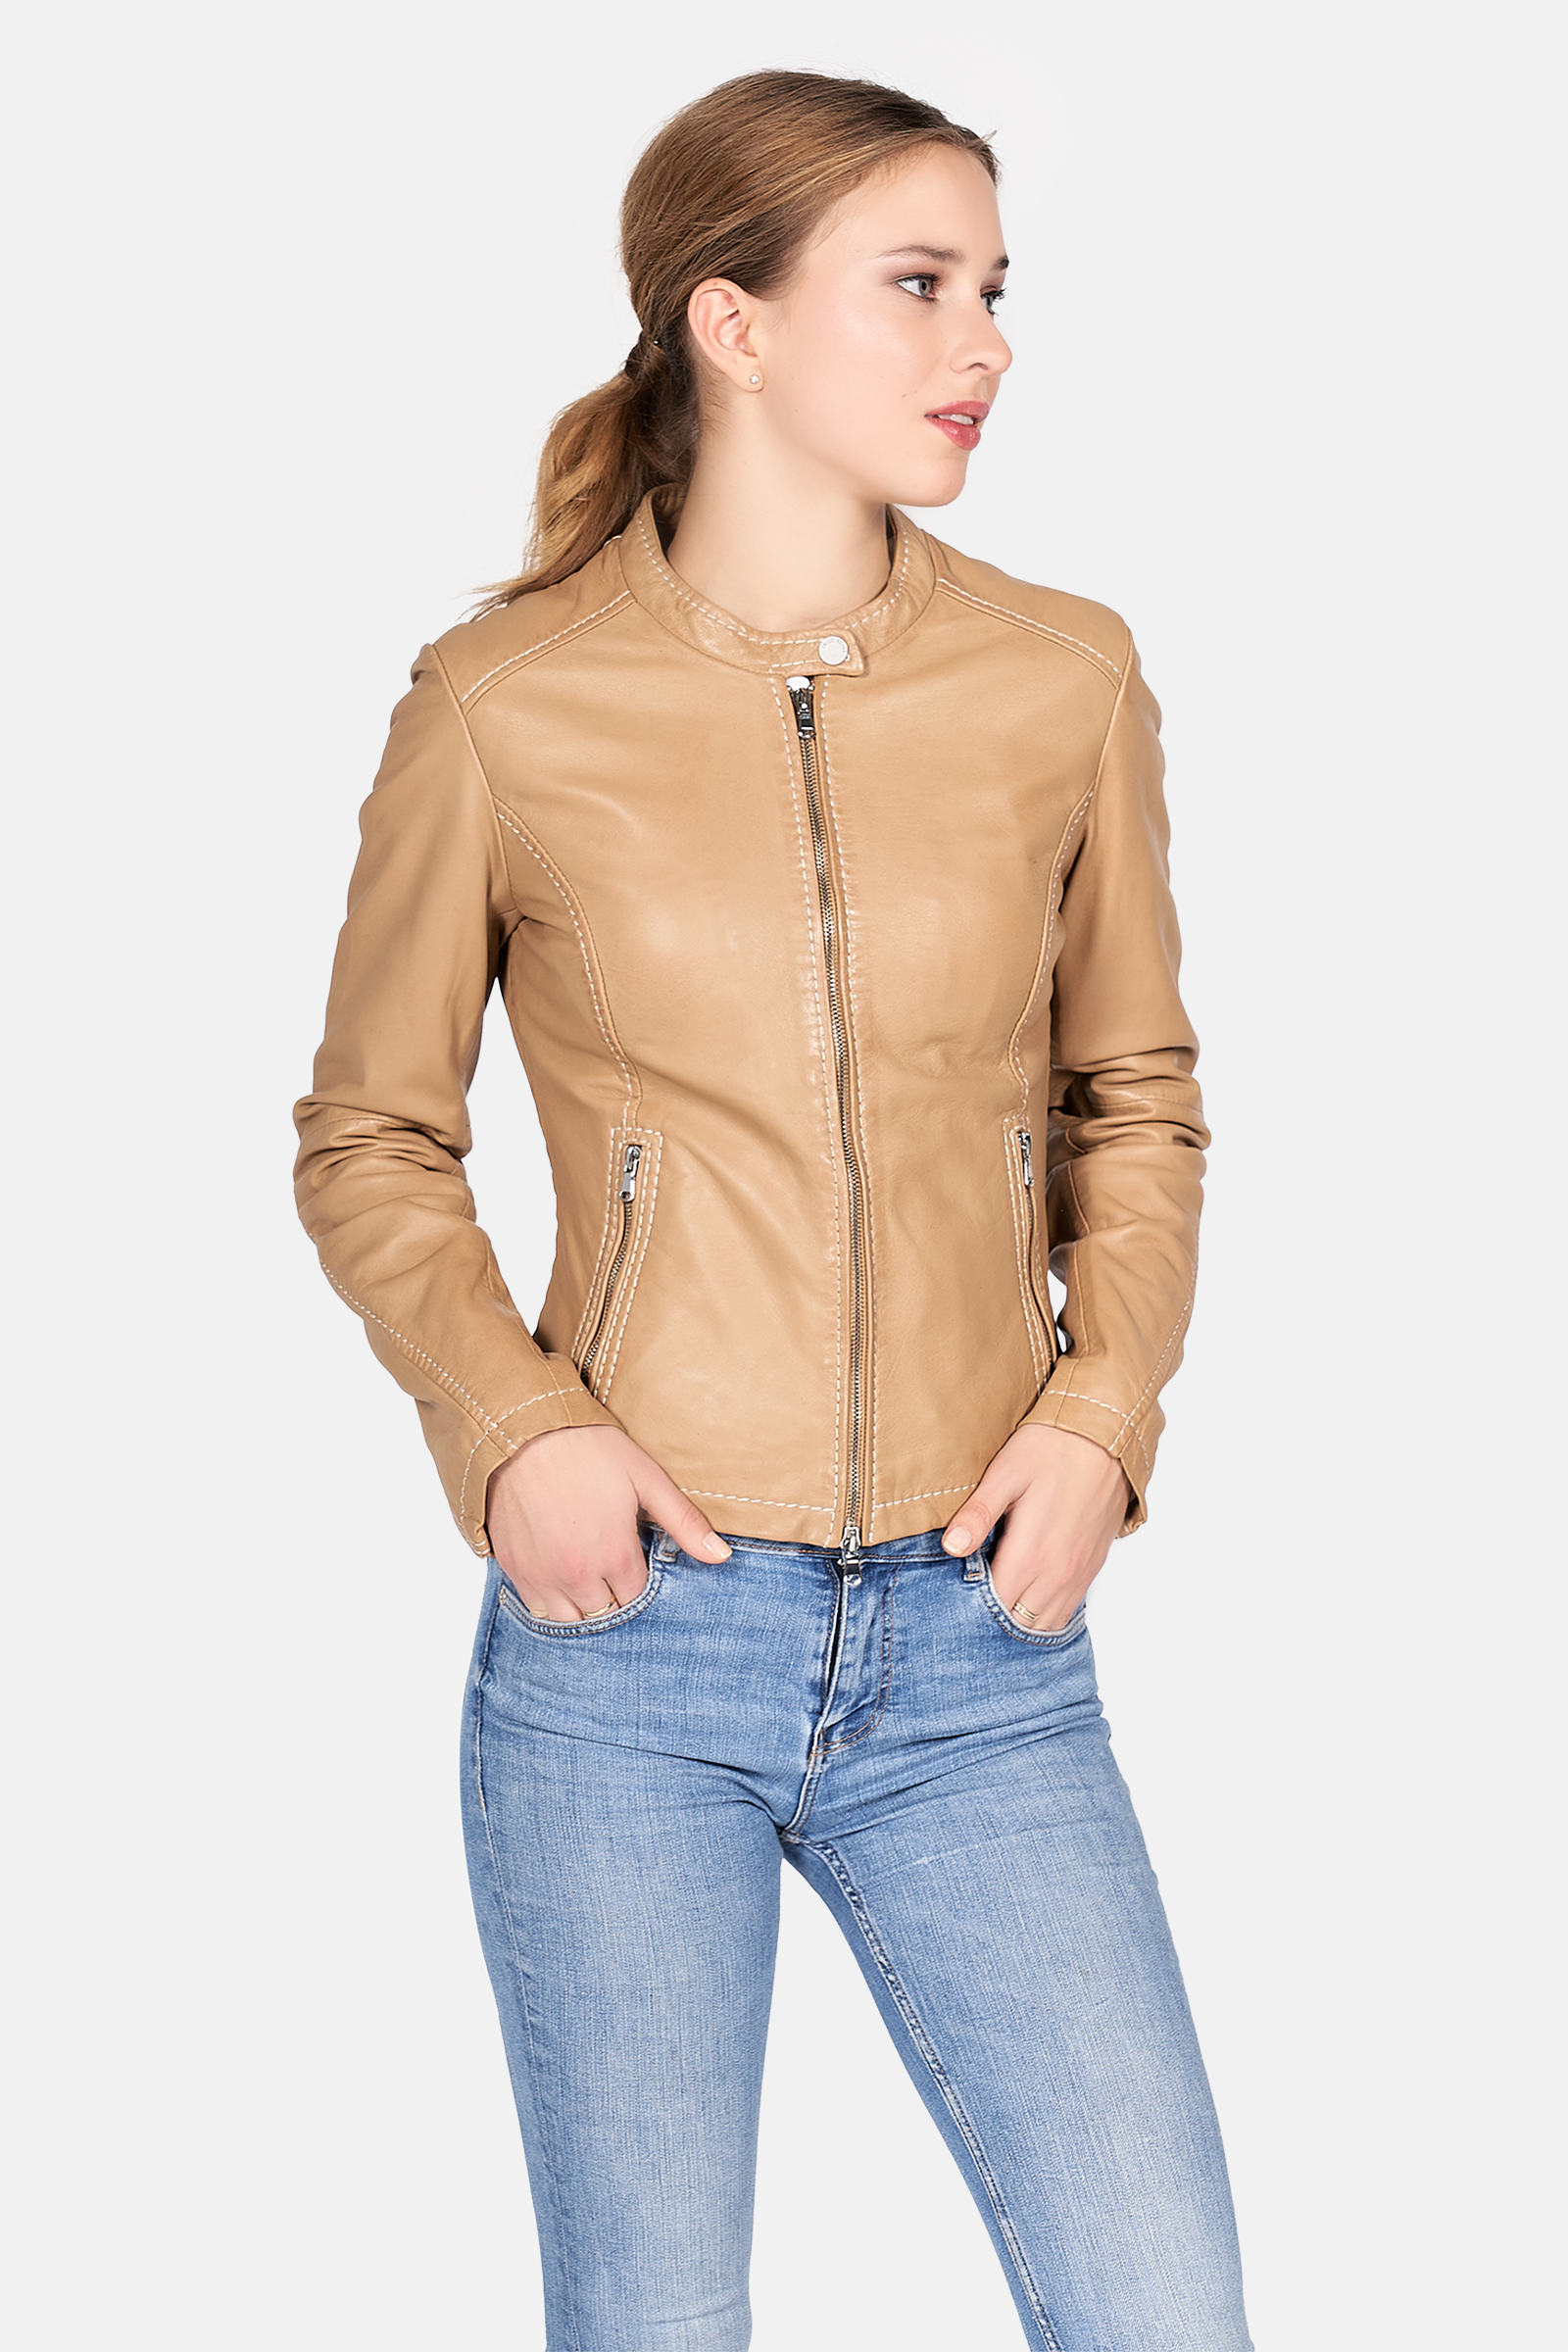 Emellie-FN | Leather Jackets | Women | Freaky Nation